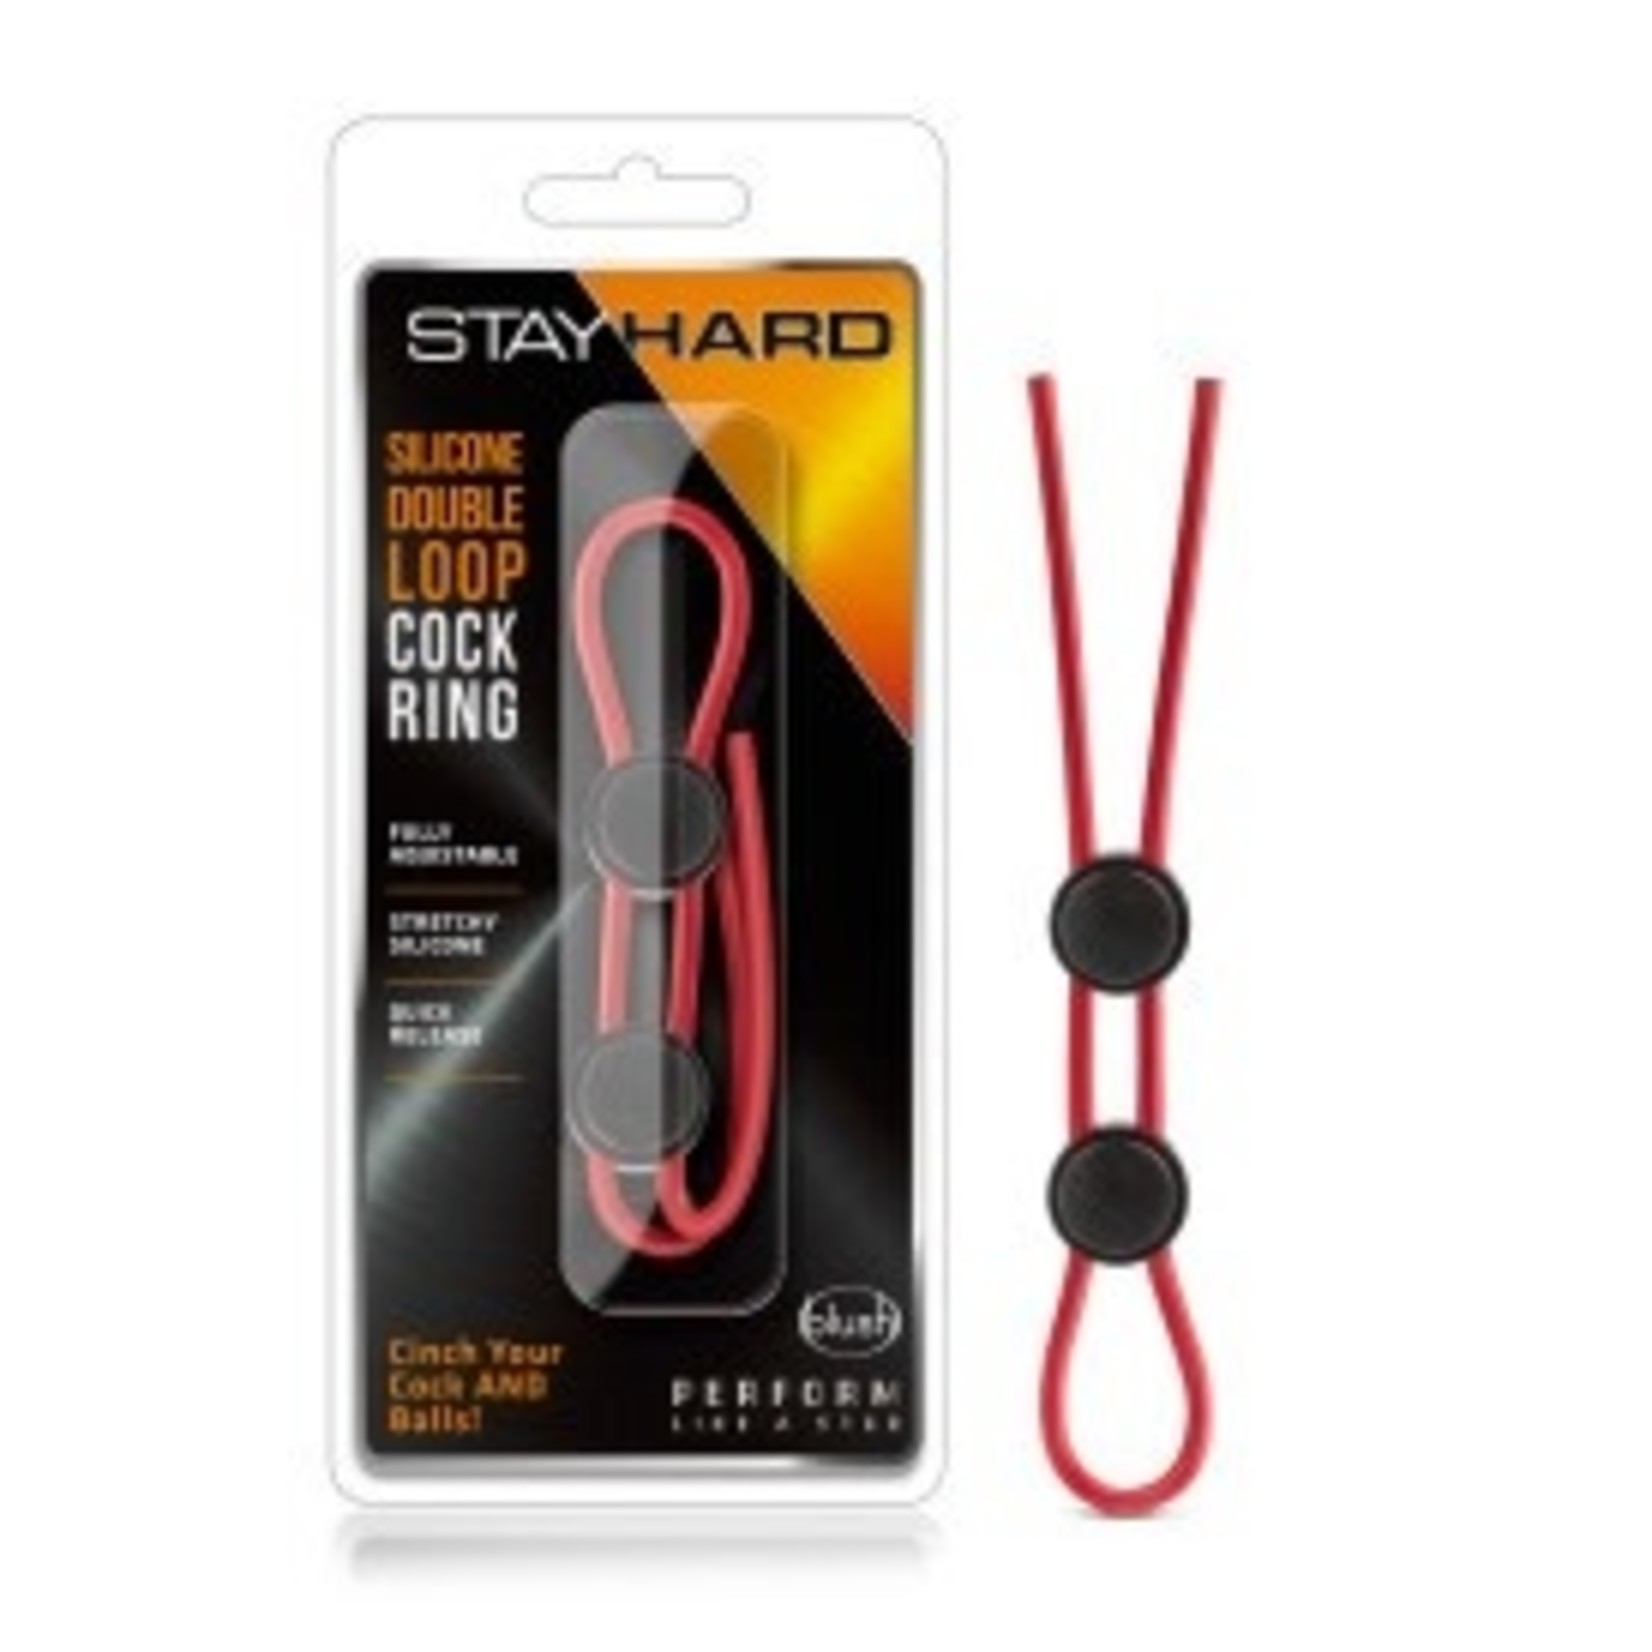 BLUSH BLUSH - STAY HARD - SILICONE DOUBLE LOOP COCK RING - RED